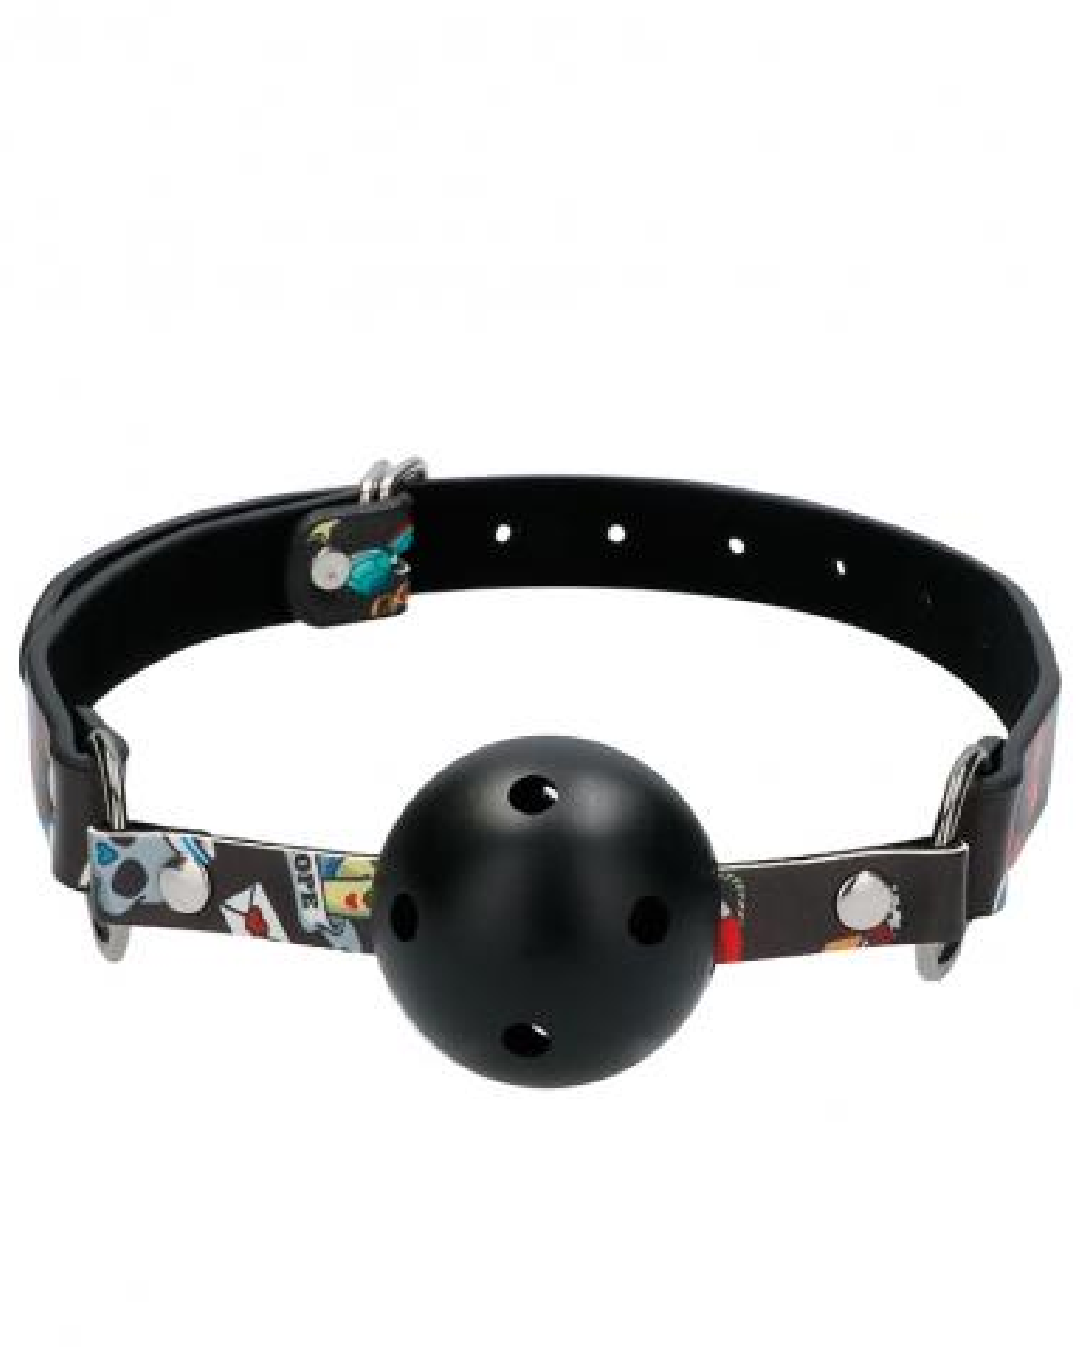 Ouch! Old School Tattoo Style Printed Ball Gag 